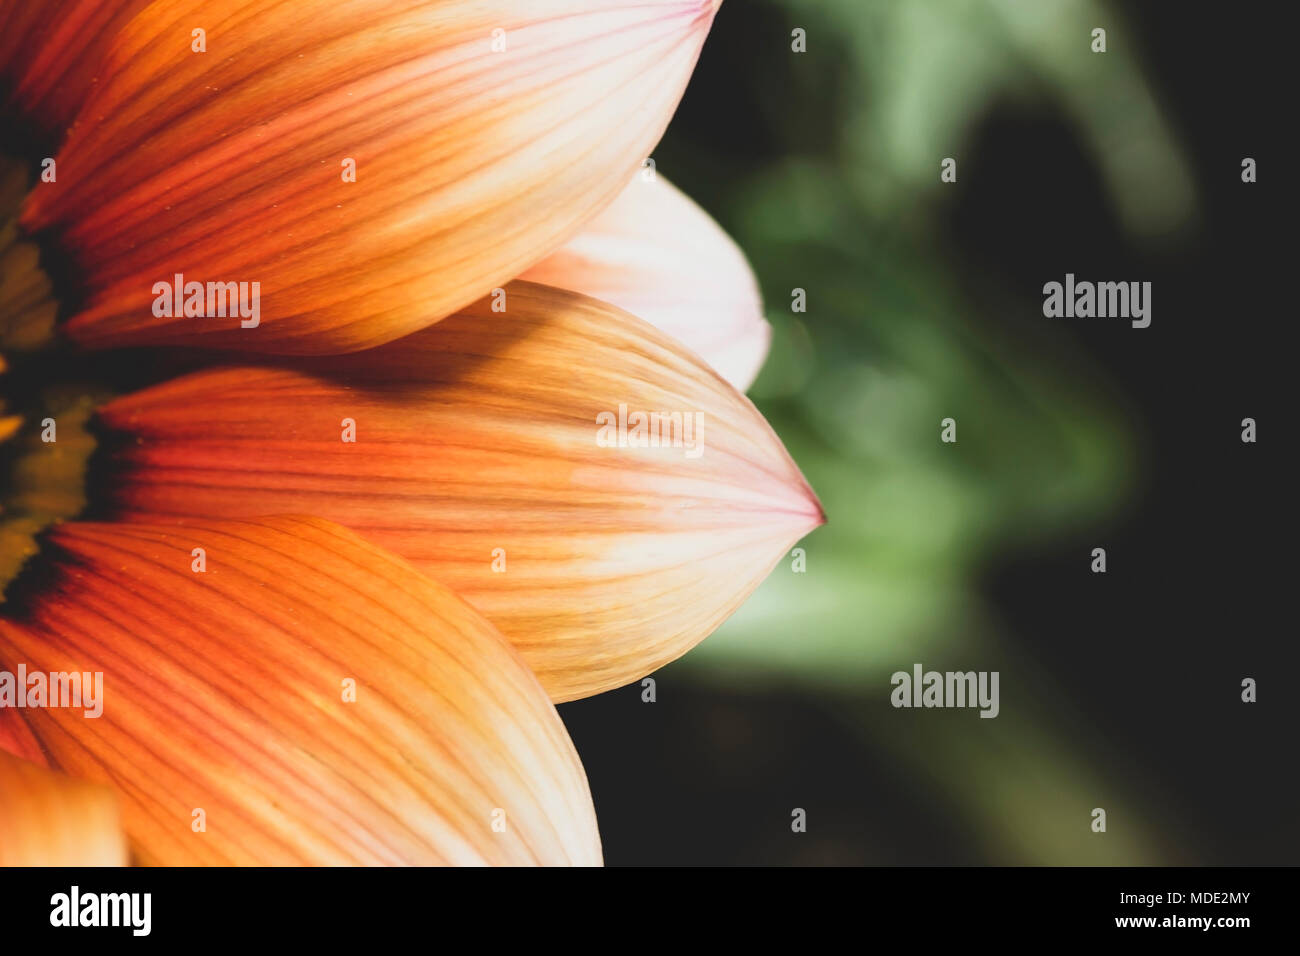 Closeup of orange flower, muted colors. Stock Photo